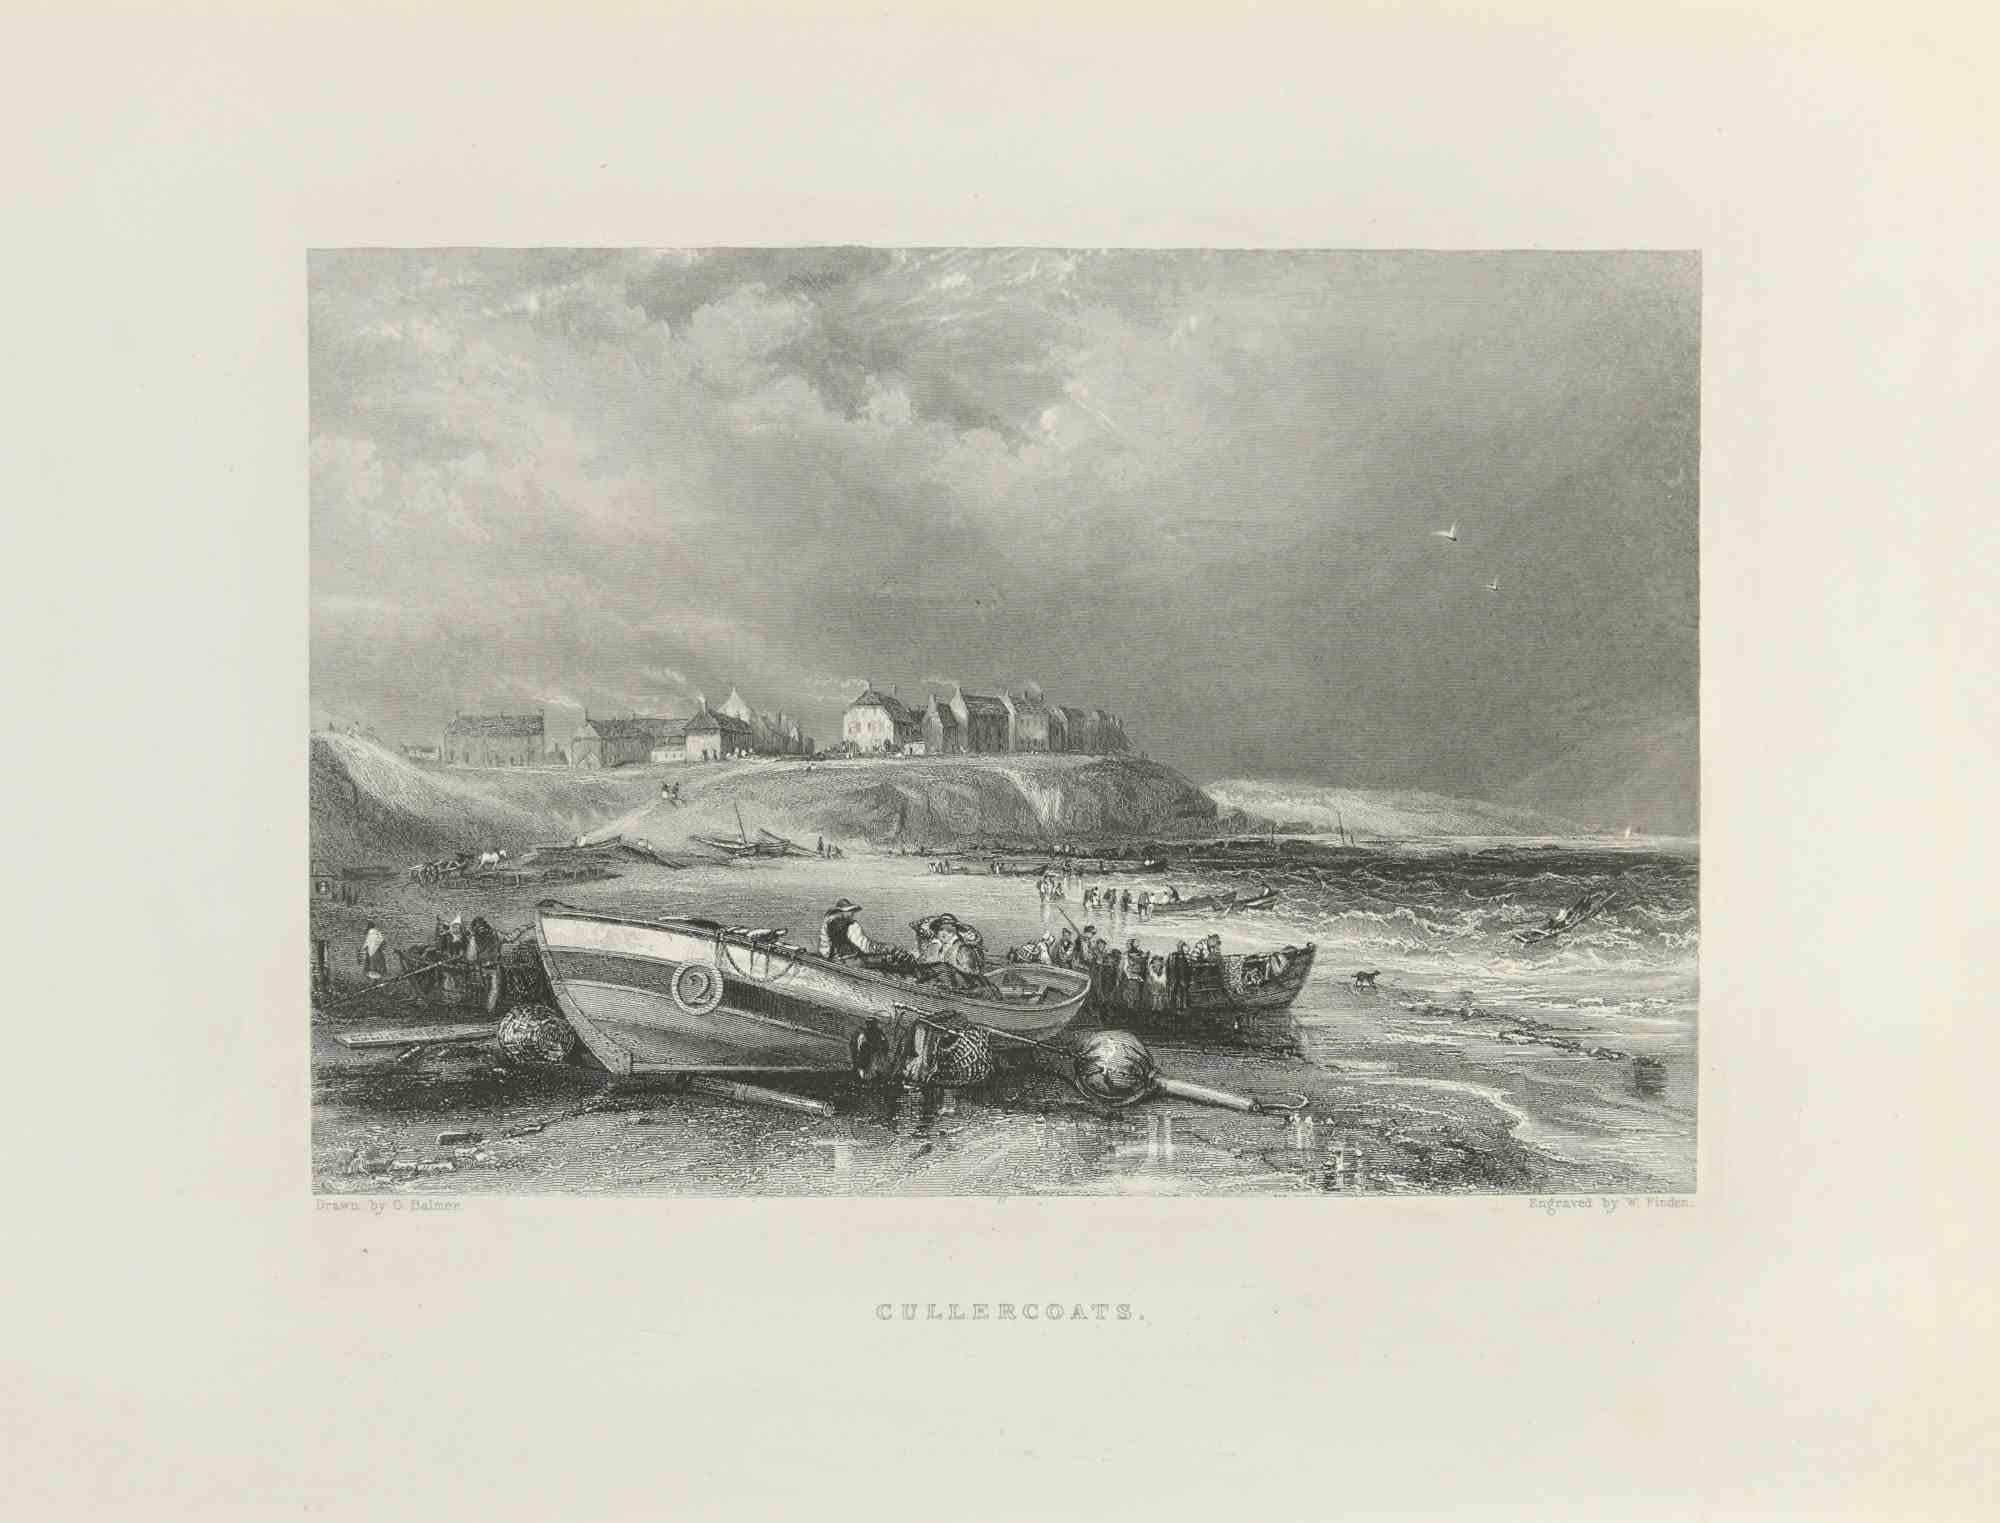 Cullercoats is an etching realized in 1845 by George Balmer.

Signed on the plate. 

Titled on the lower center.

Good conditions with slight foxing.

The artwork is beautifully realized in a well-balanced composition through short, deft strokes.